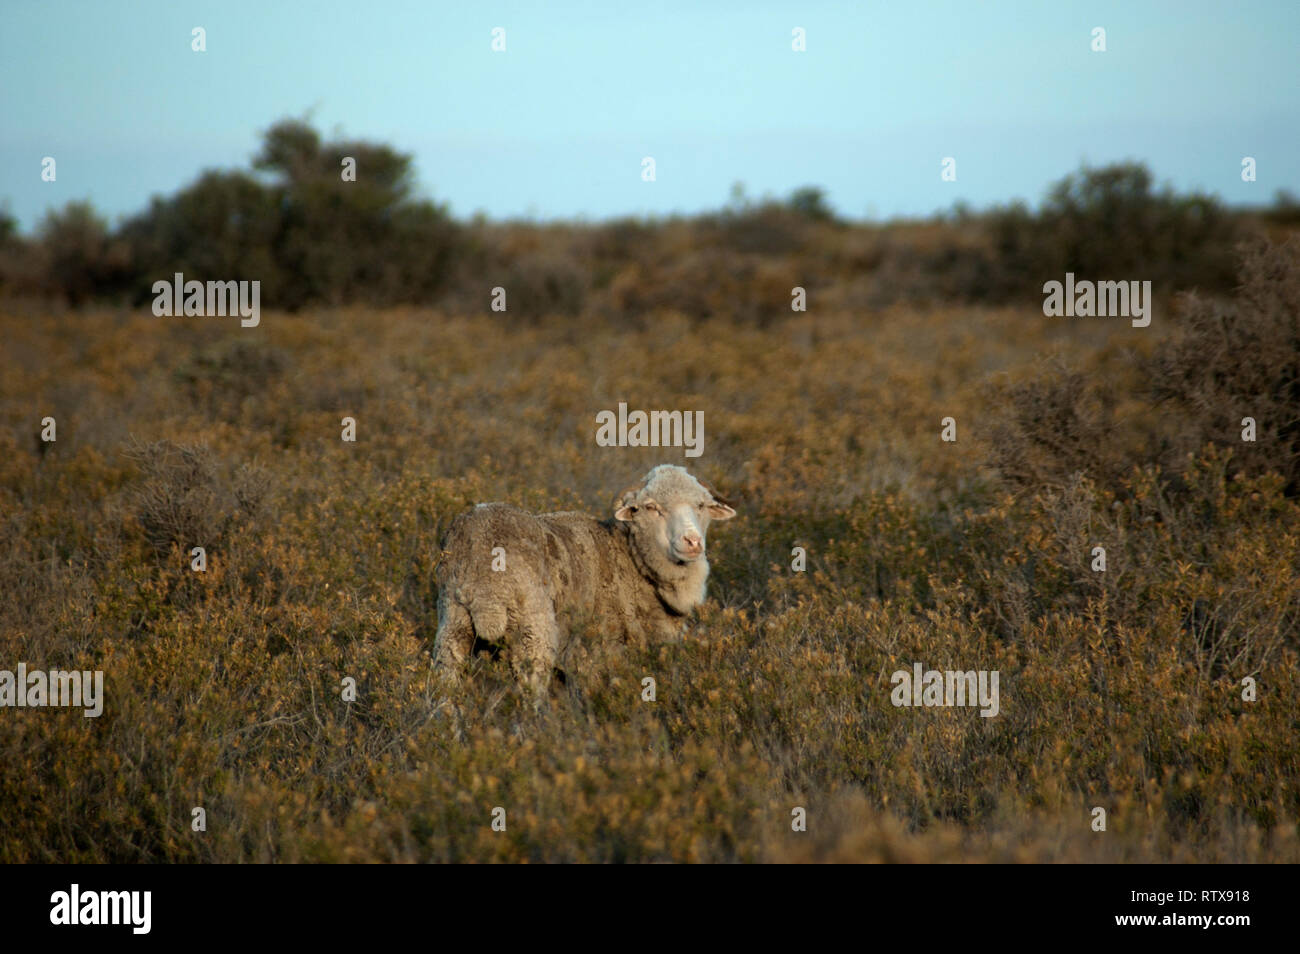 Patagonian sheep, Ovis aries, a breed of sheep commonly seen in the steppes of the Valdes Peninsula, Chubut, Argentina Stock Photo